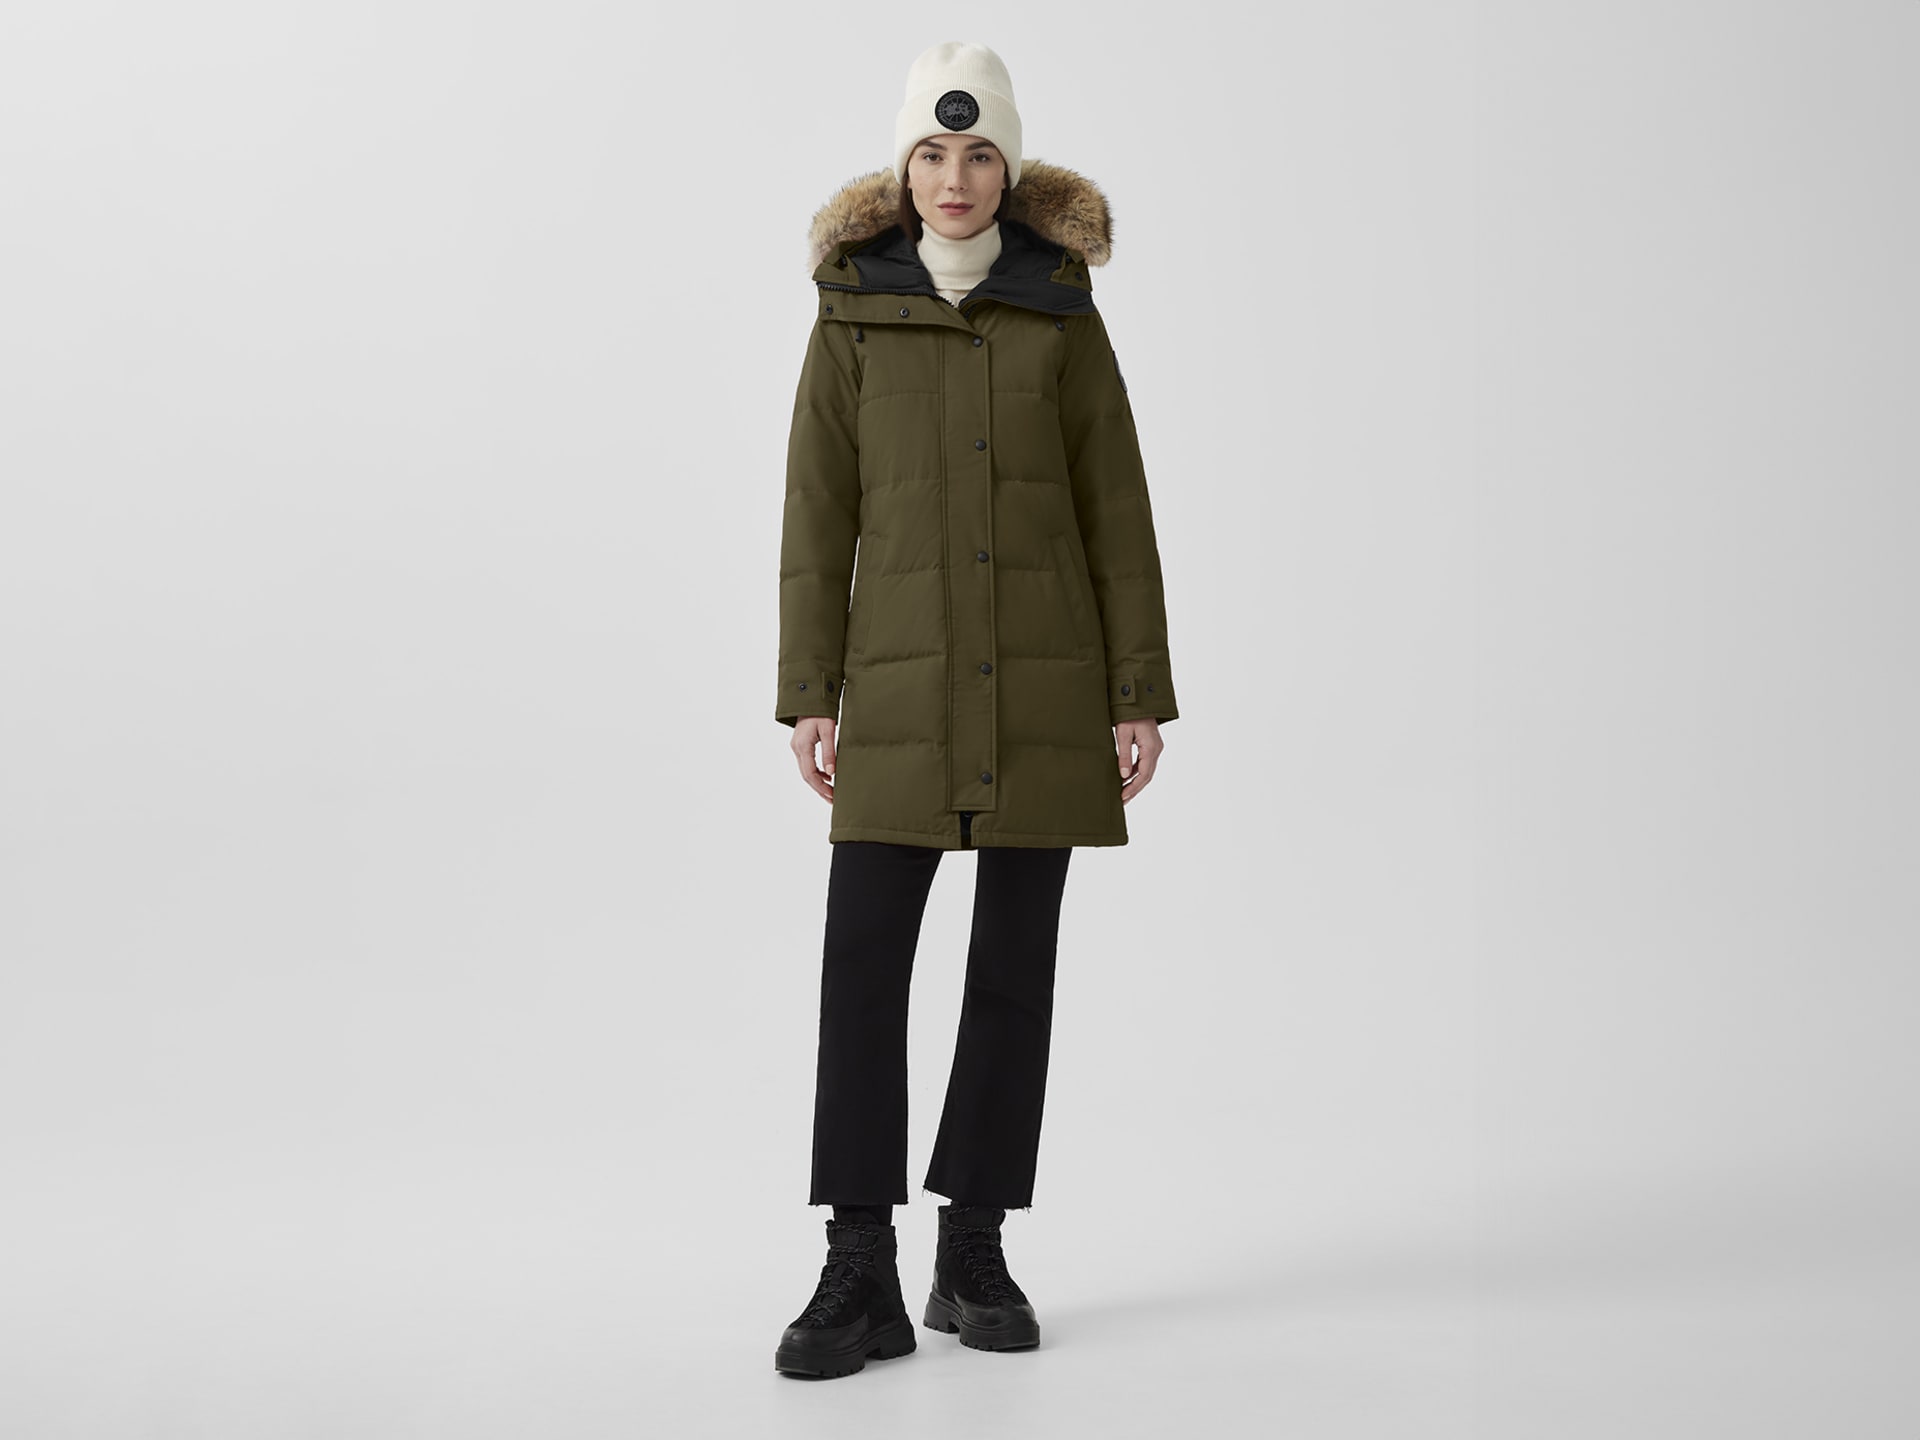  Canada Goose Men's Expedition Parka, Navy, Large : Clothing,  Shoes & Jewelry